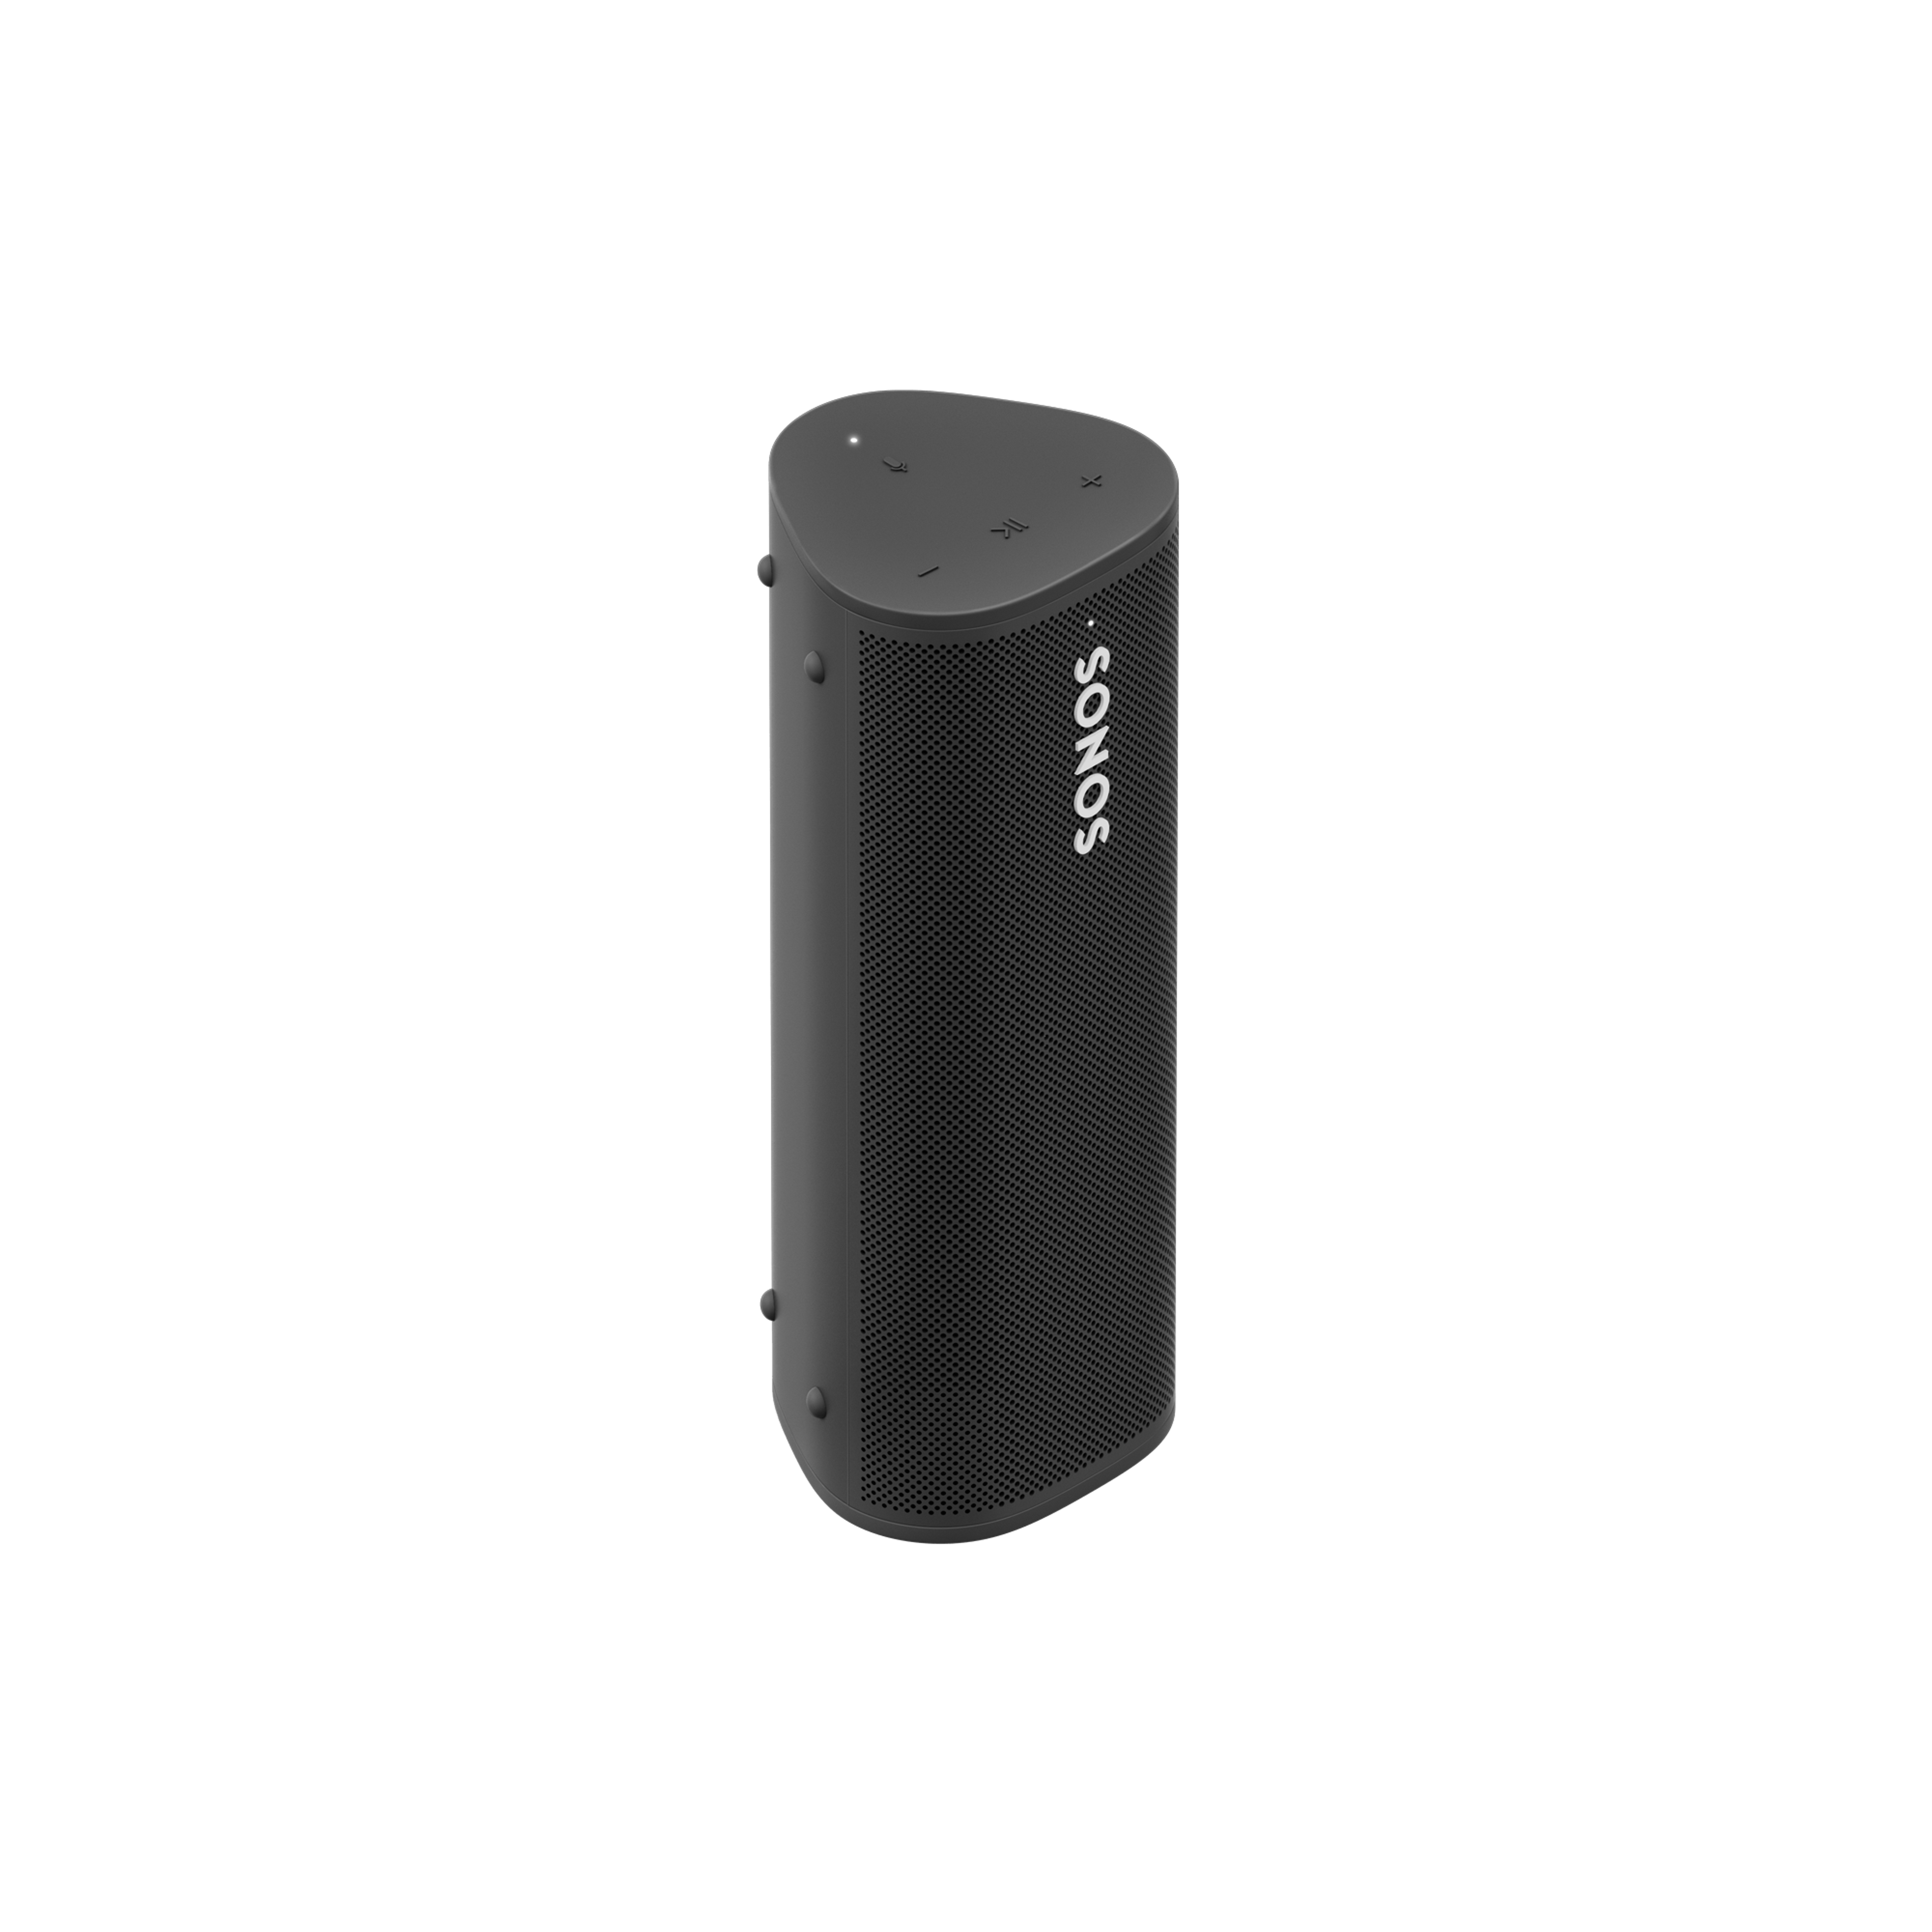 Image of a black Sonos Roam turned at an angle